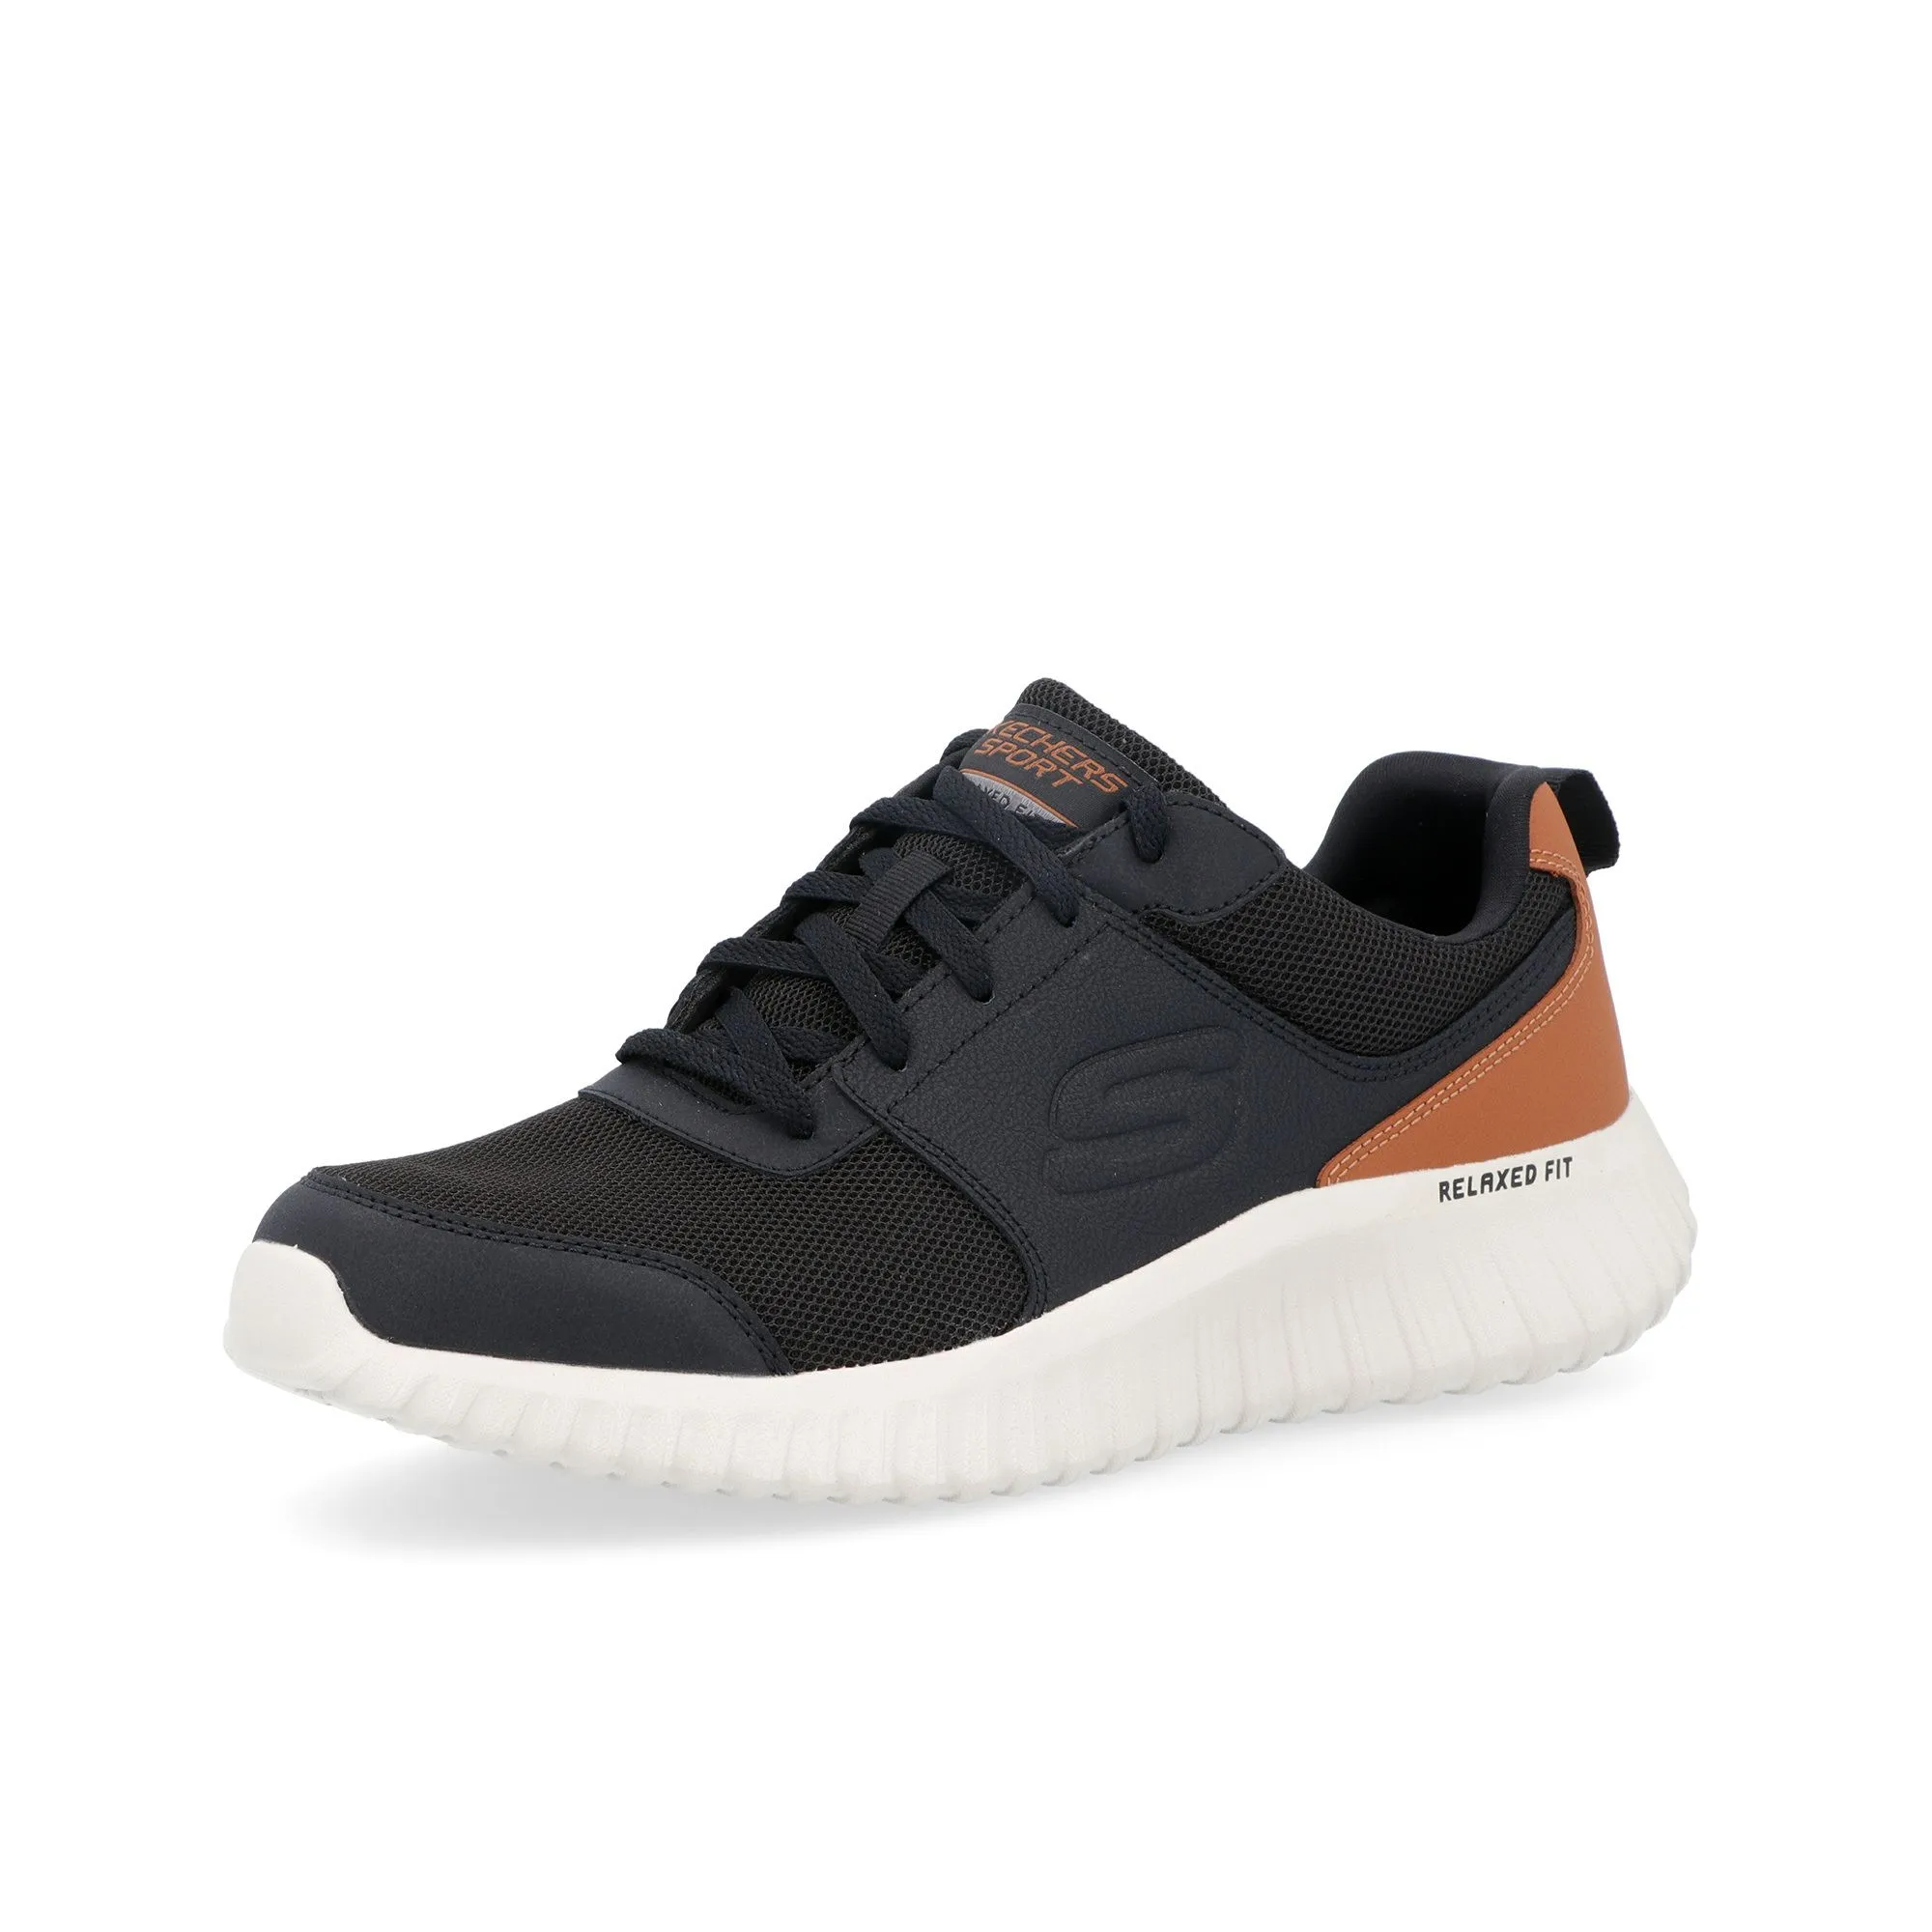 Sneaker da uomo Depth Charge design Relaxed Fit